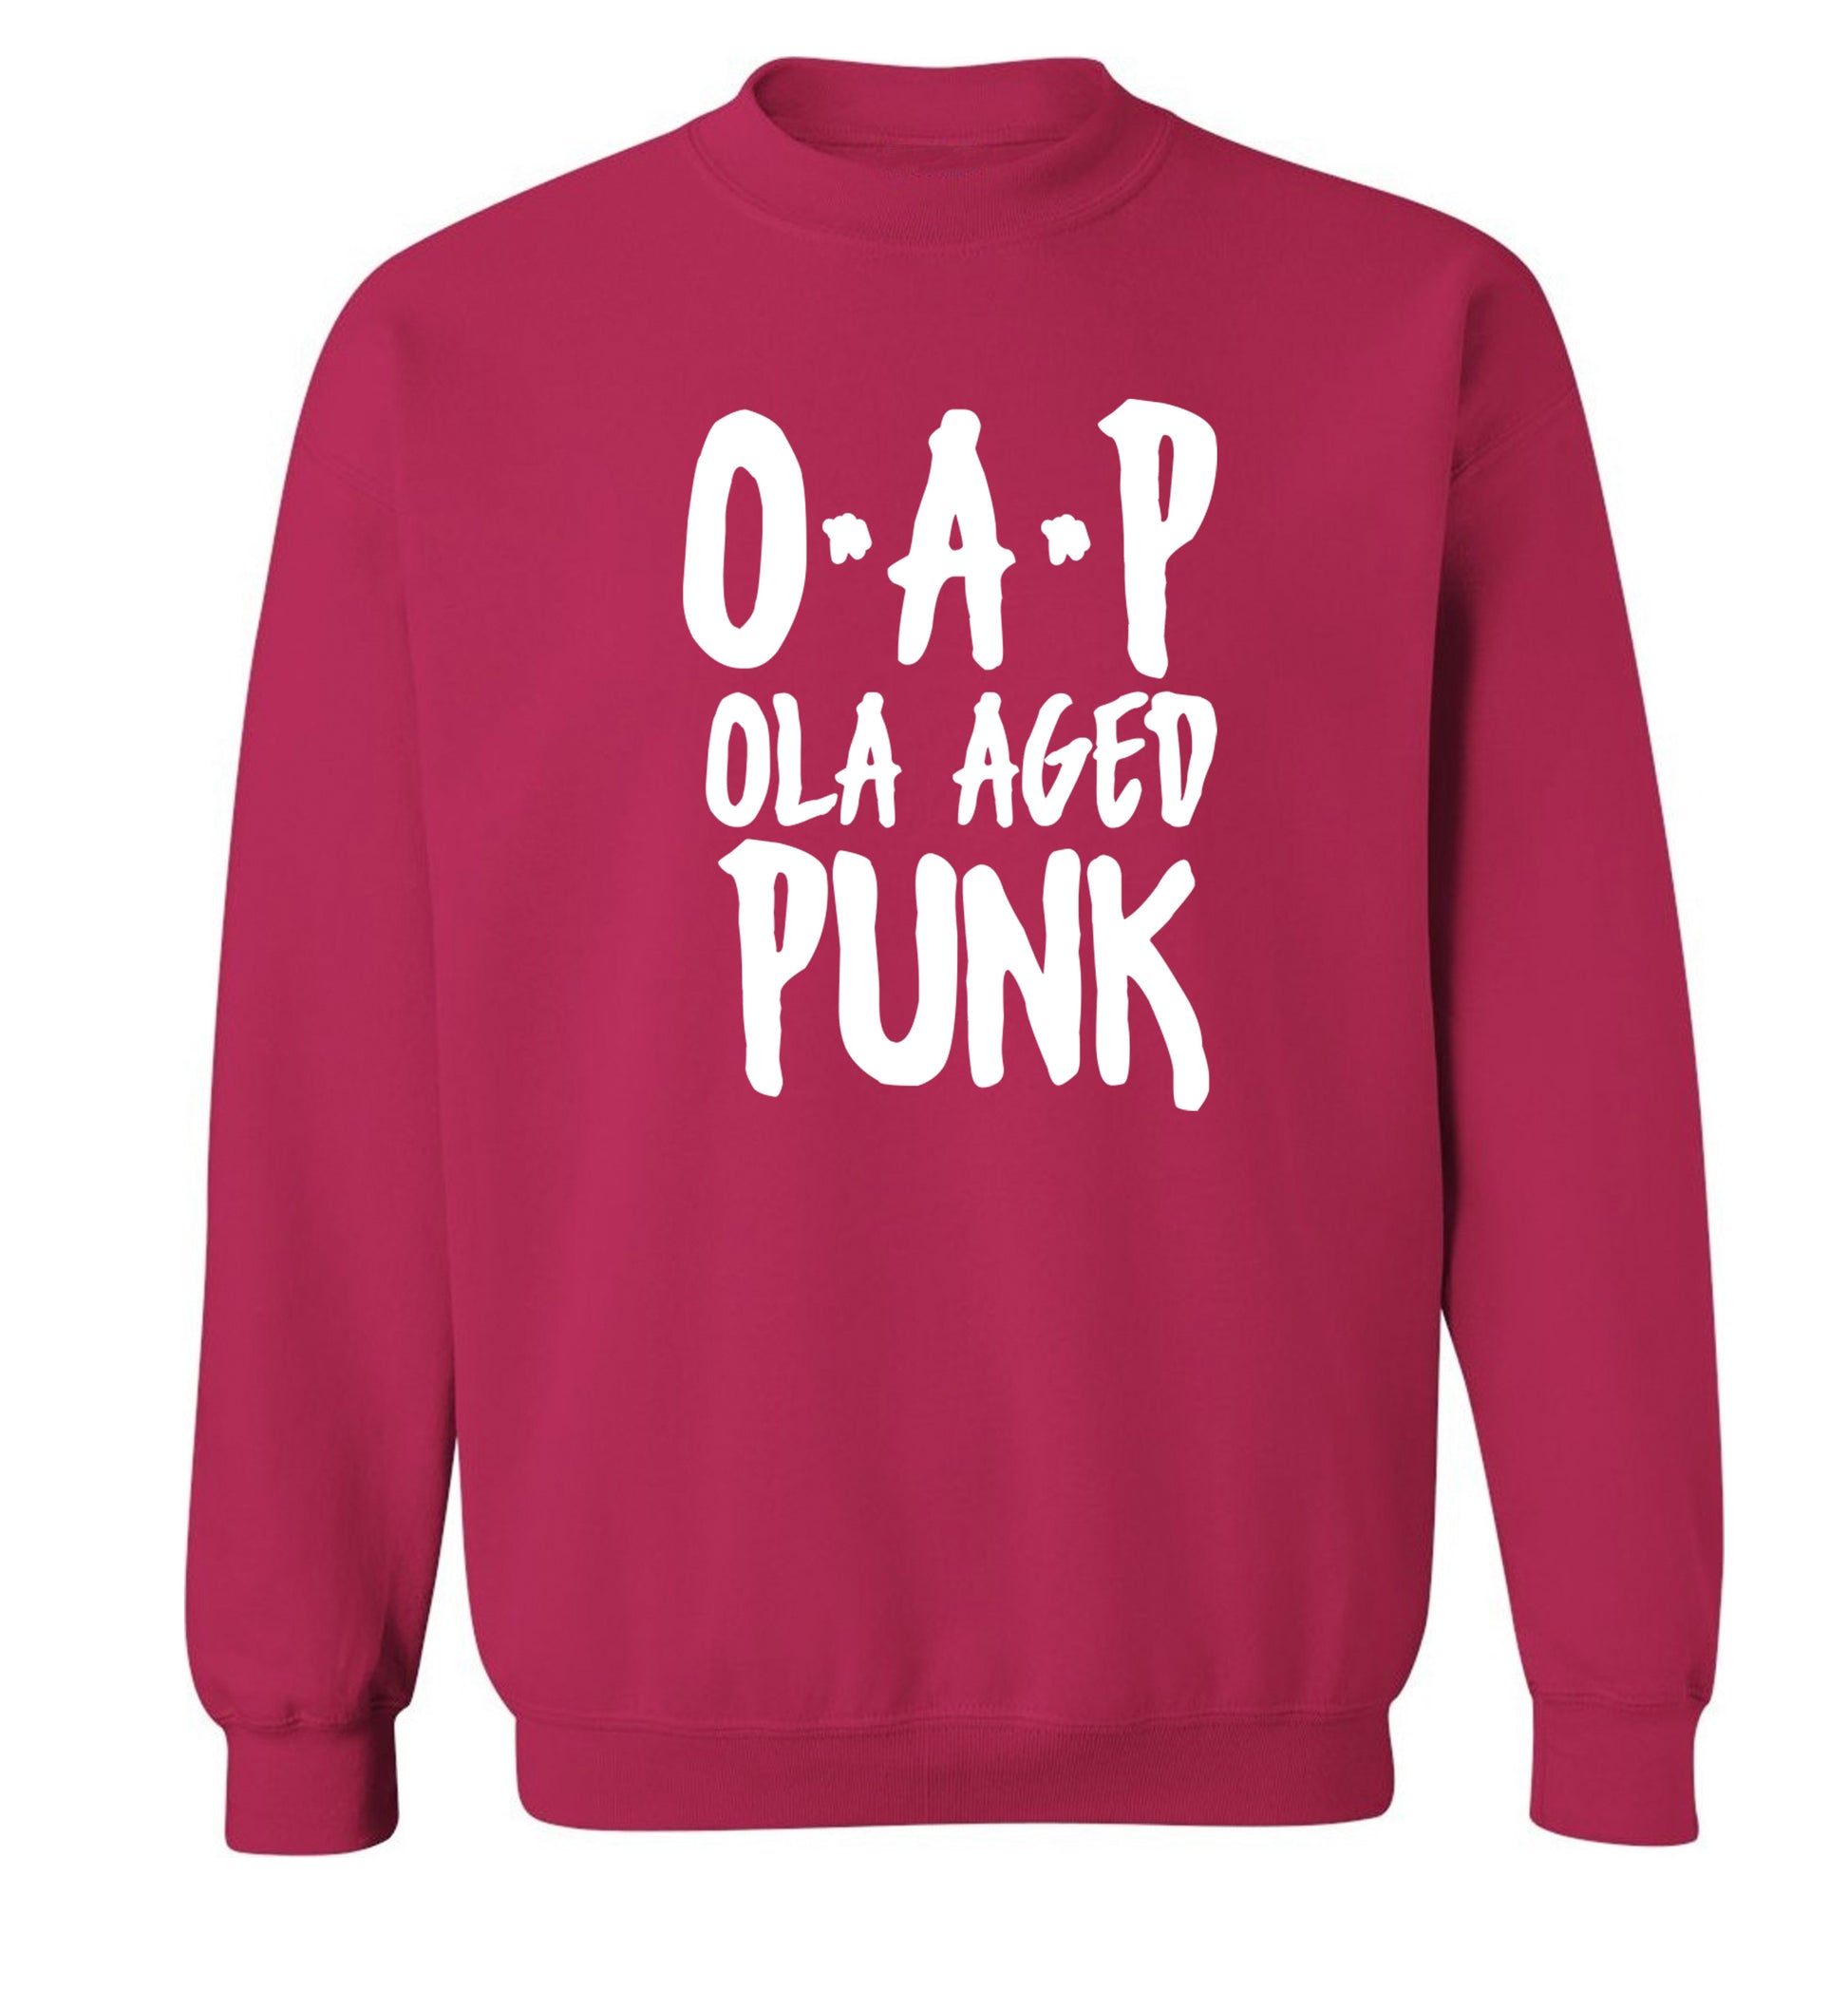 O.A.P Old Aged Punk Adult's unisex pink Sweater 2XL